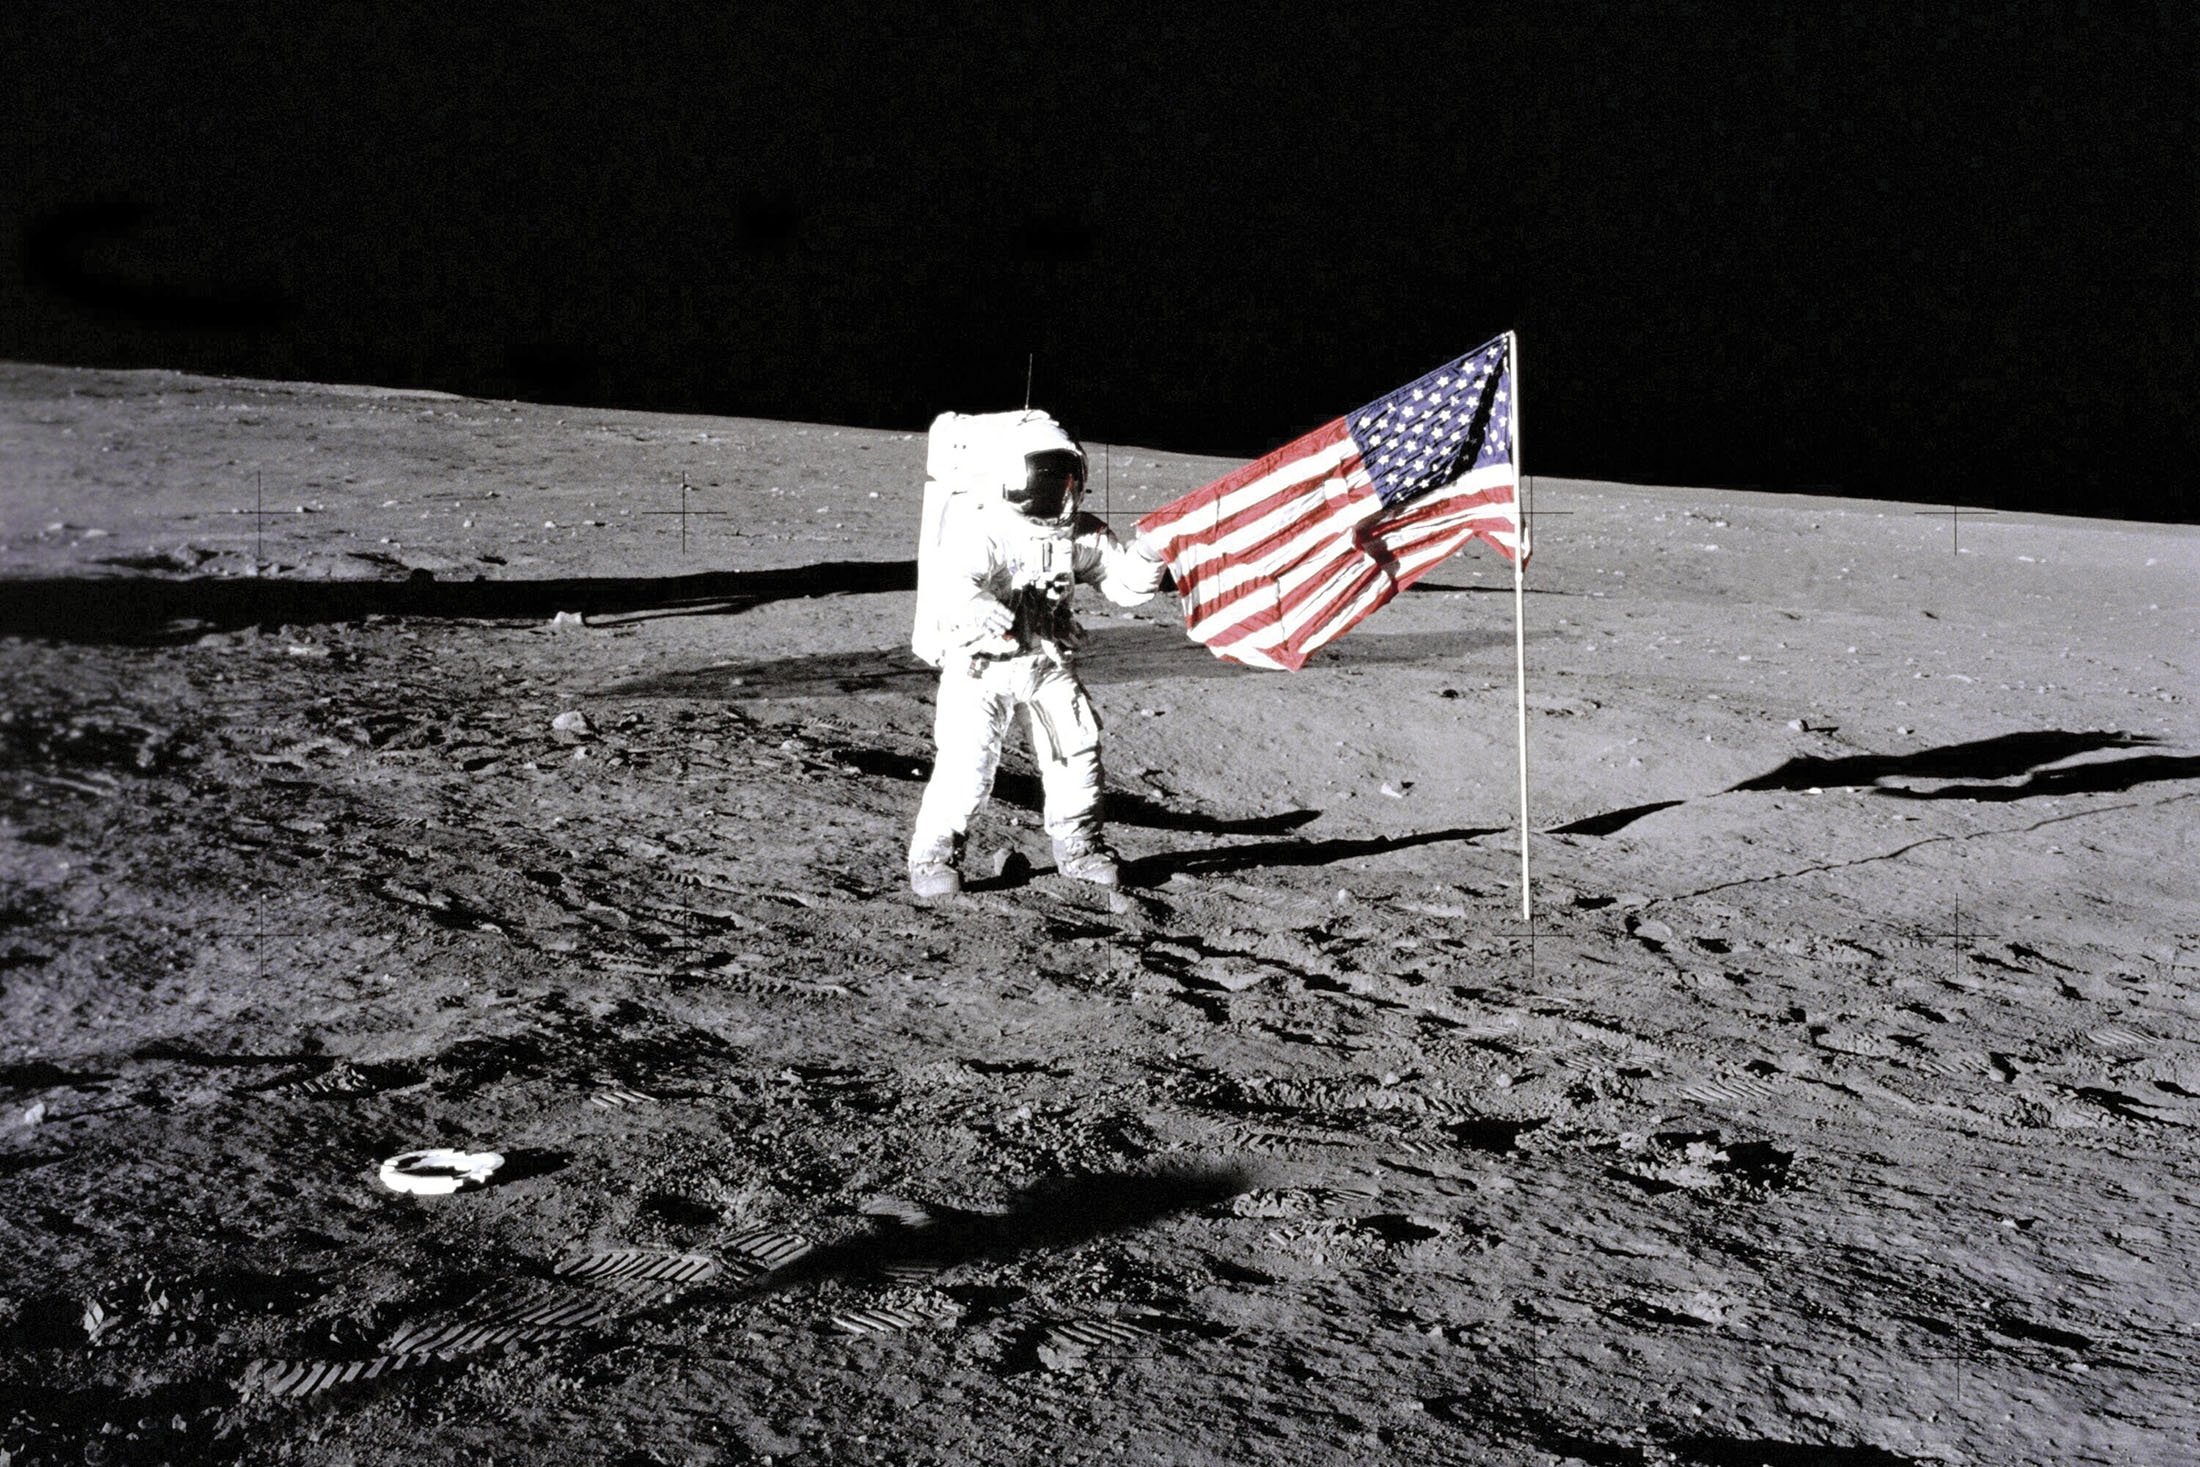 Kubrick did it! ExRussian space chief doubts US landing on moon